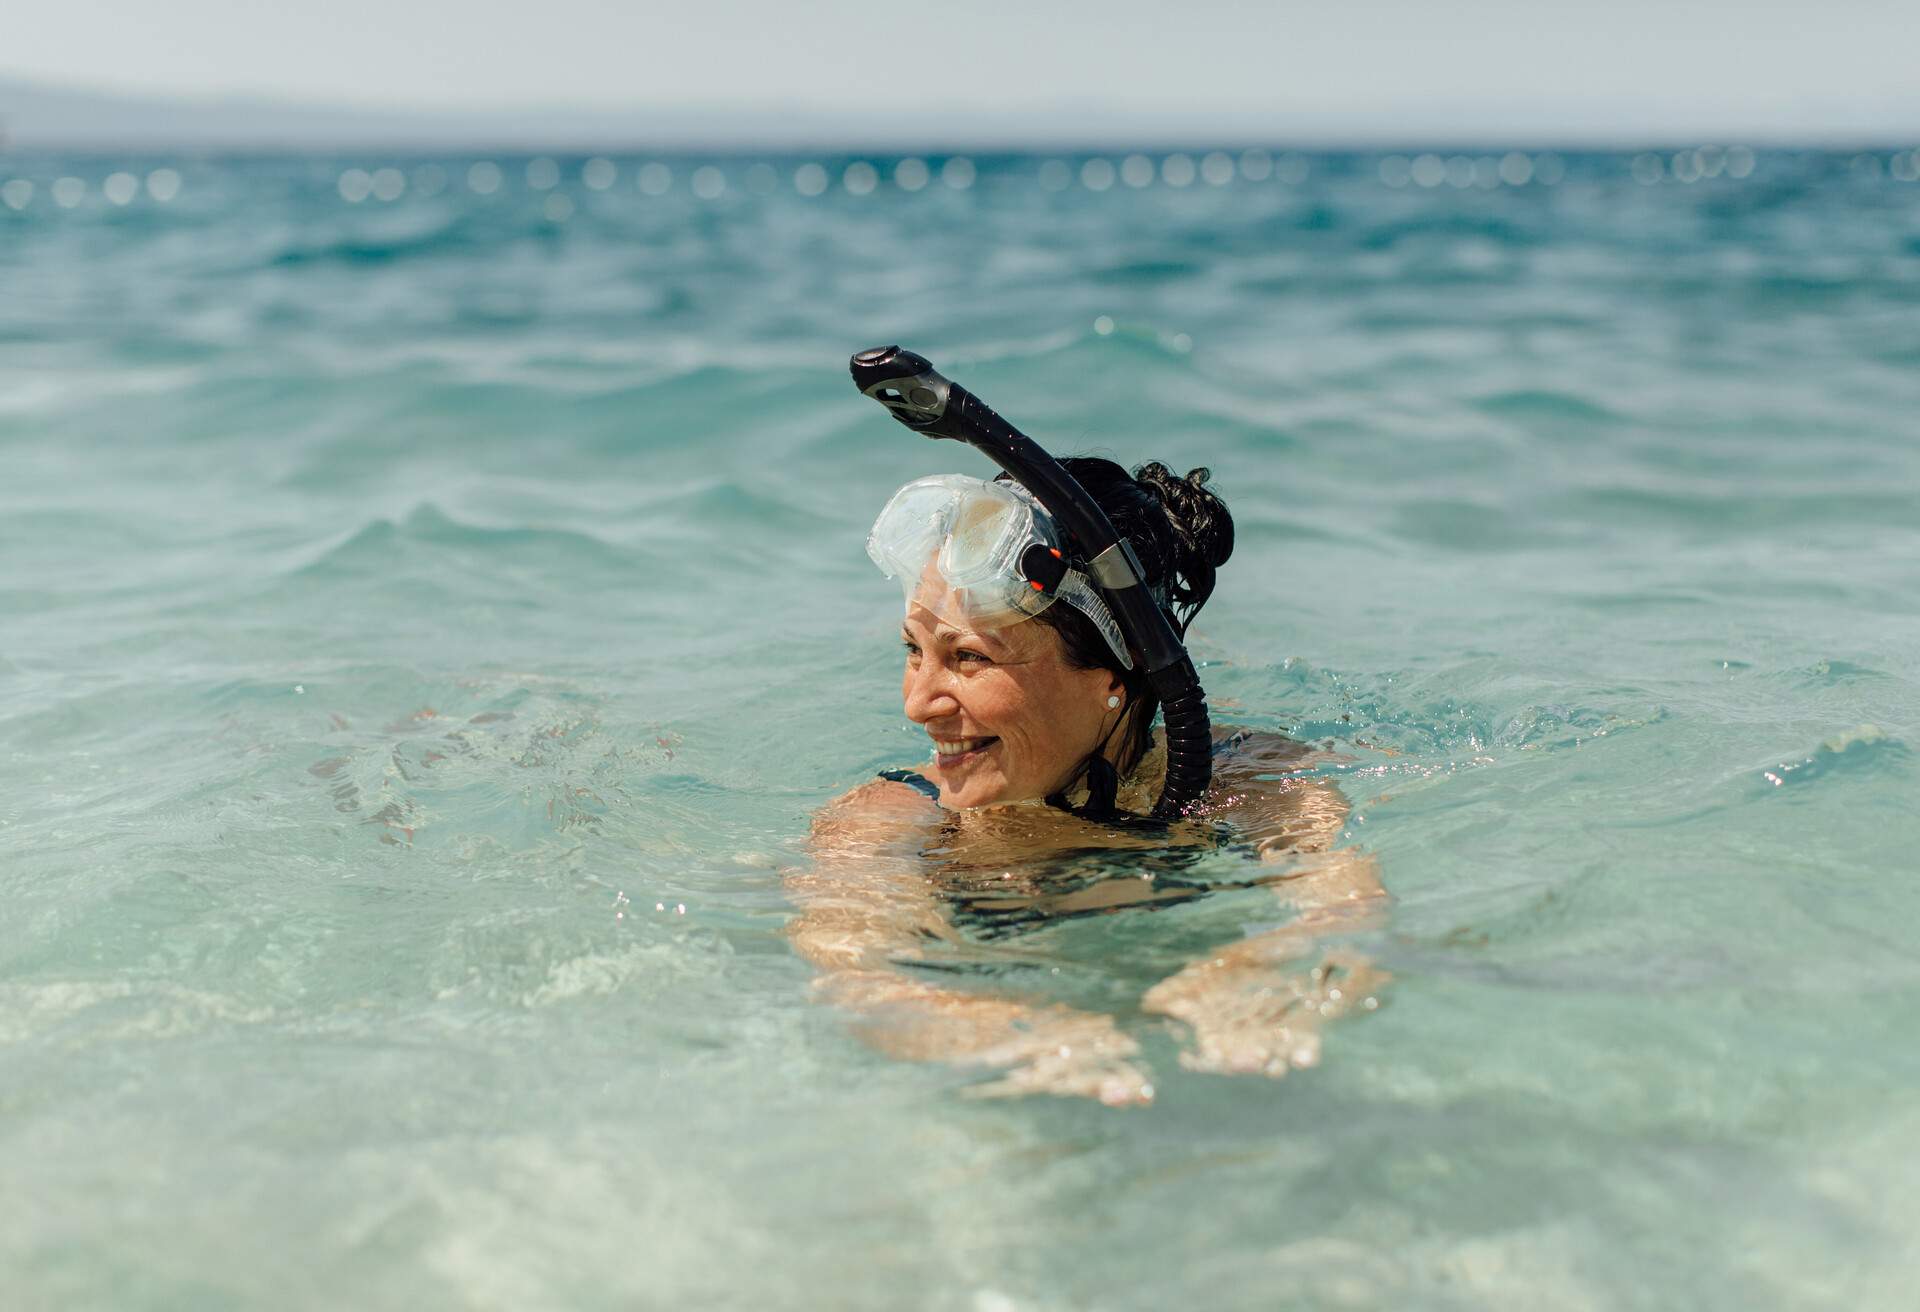 THEME_SNORKELLING_PEOPLE_SENIOR_WOMAN_GettyImages-1162315267